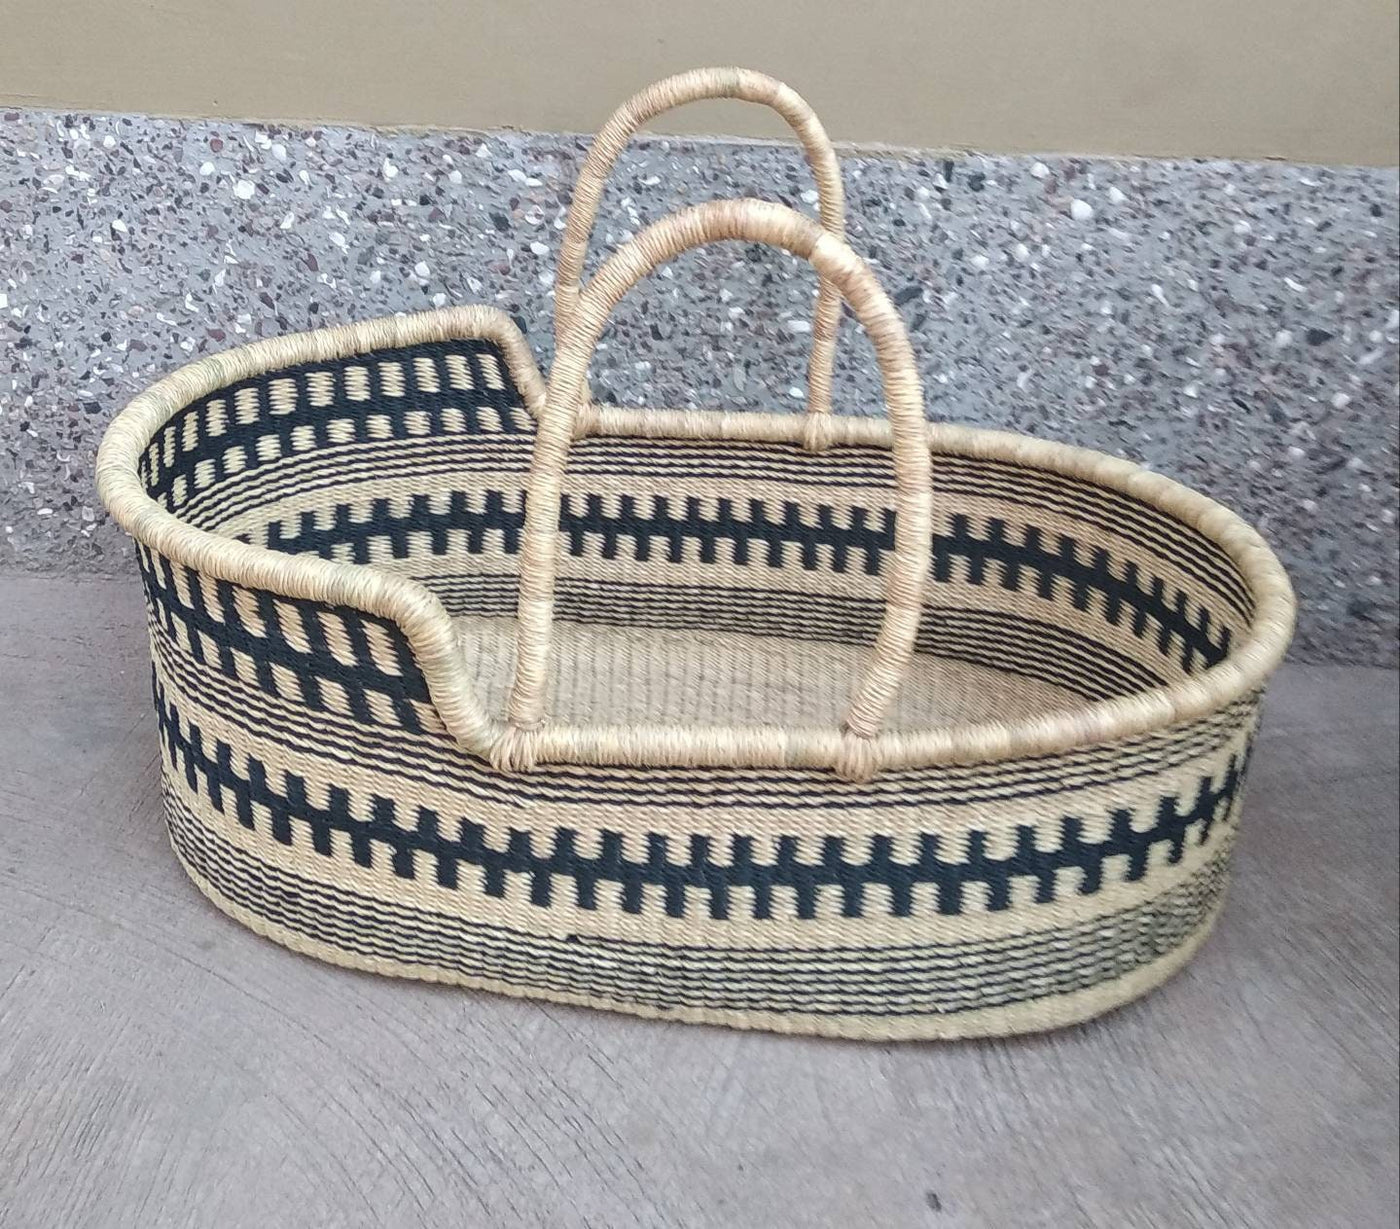 Moses basket | Newborn girl coming home outfit |Baby boy | Toddler bed furniture | Baby bassinet | Moses Bassinet | Wicker baby bassinet - AfricanheritageGH